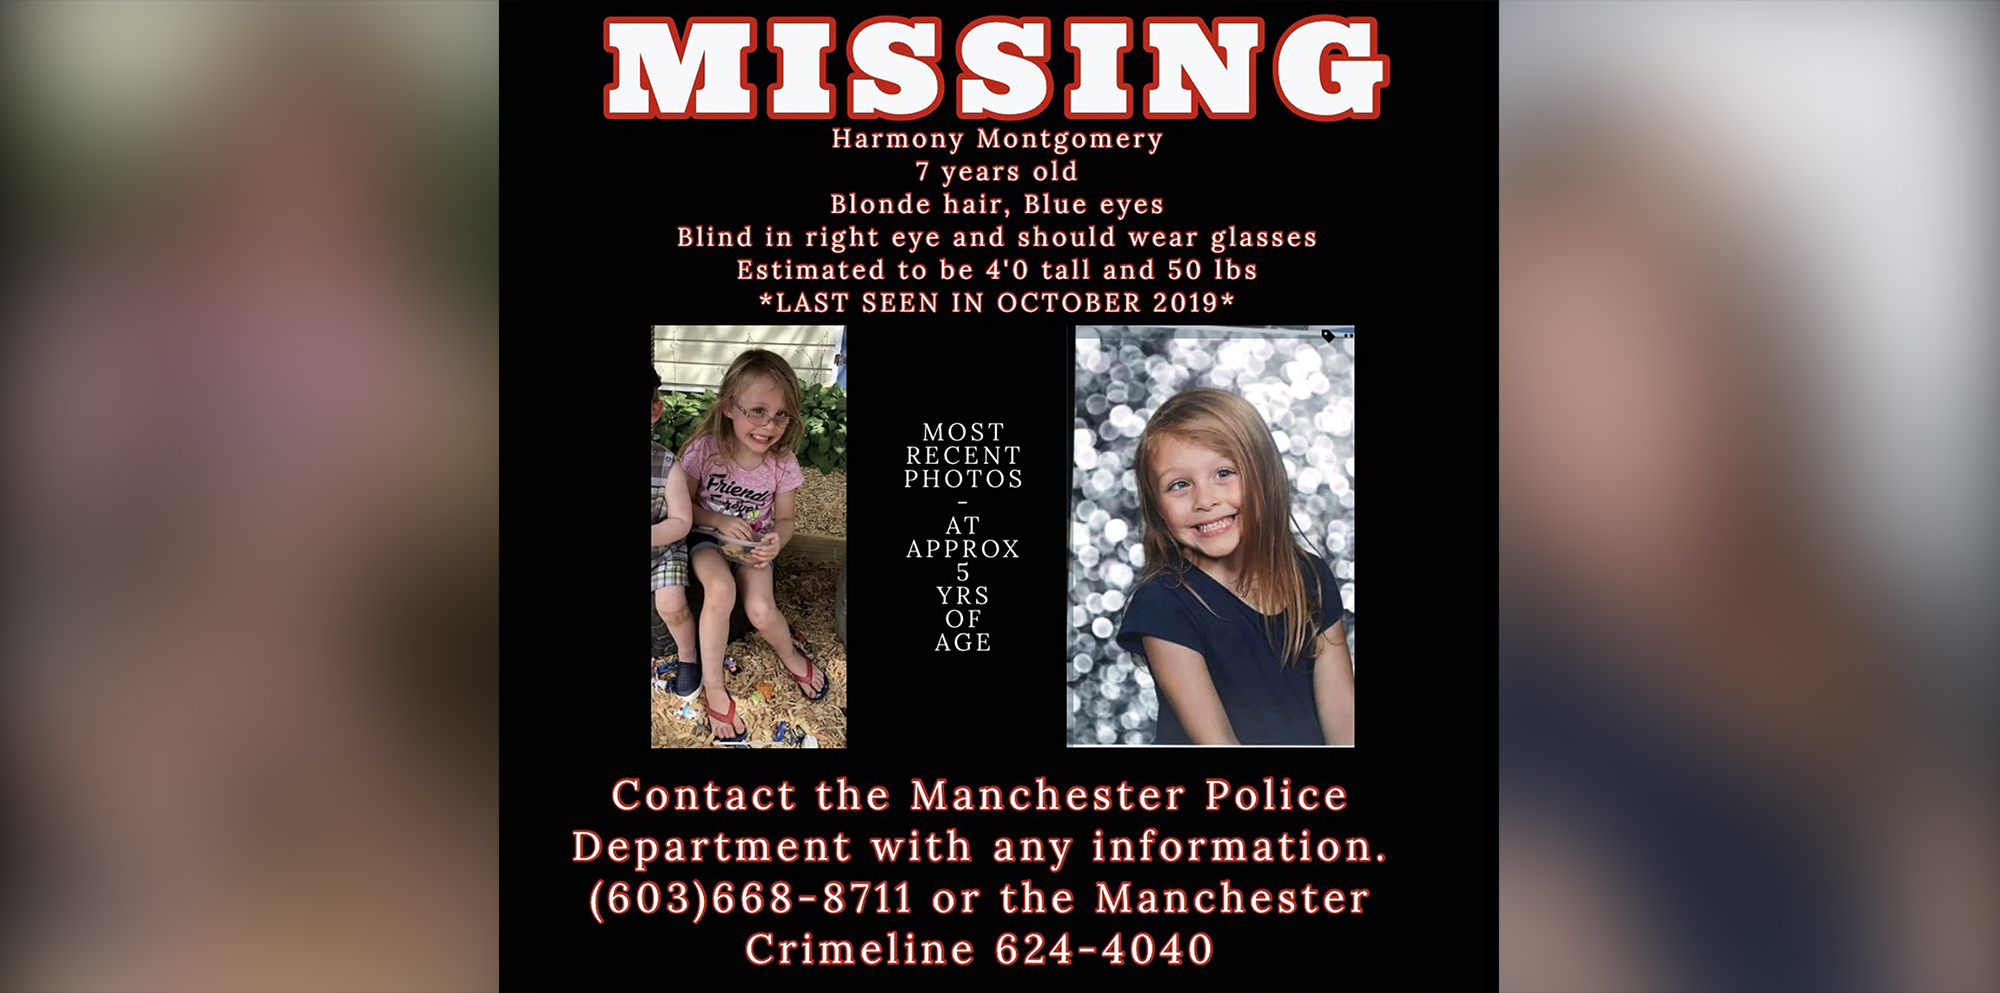 PHOTO: A Missing poster released by police in Manchester N.H. shows images of Harmony Montgomery who has been missing since Oct. 2019.